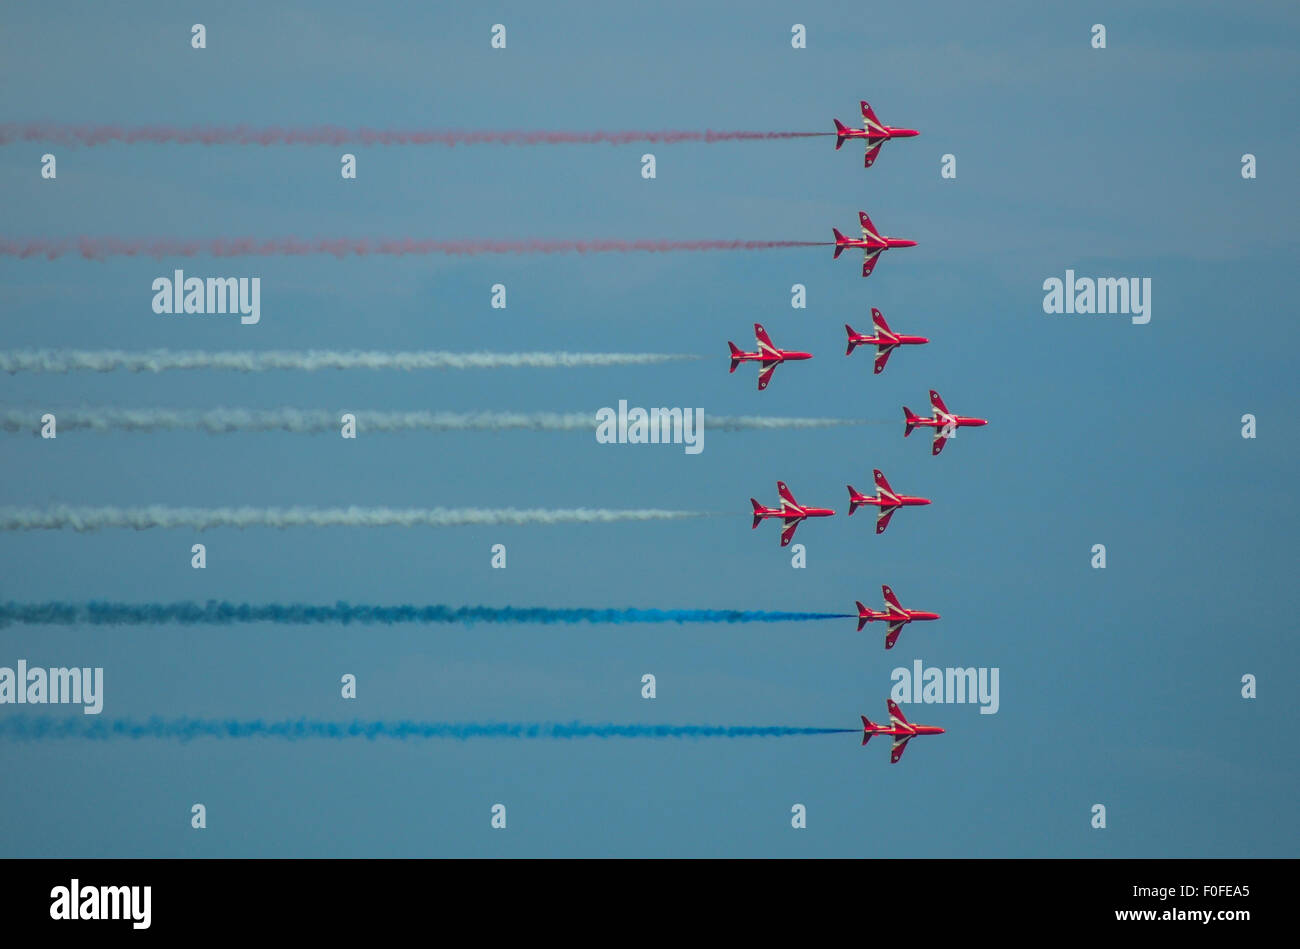 Eastbourne, East Sussex, UK..14 August 2015..Airbourne flying display went ahead today after yesterdays cancellation due to Stormy weather. Red Arrows.. Stock Photo